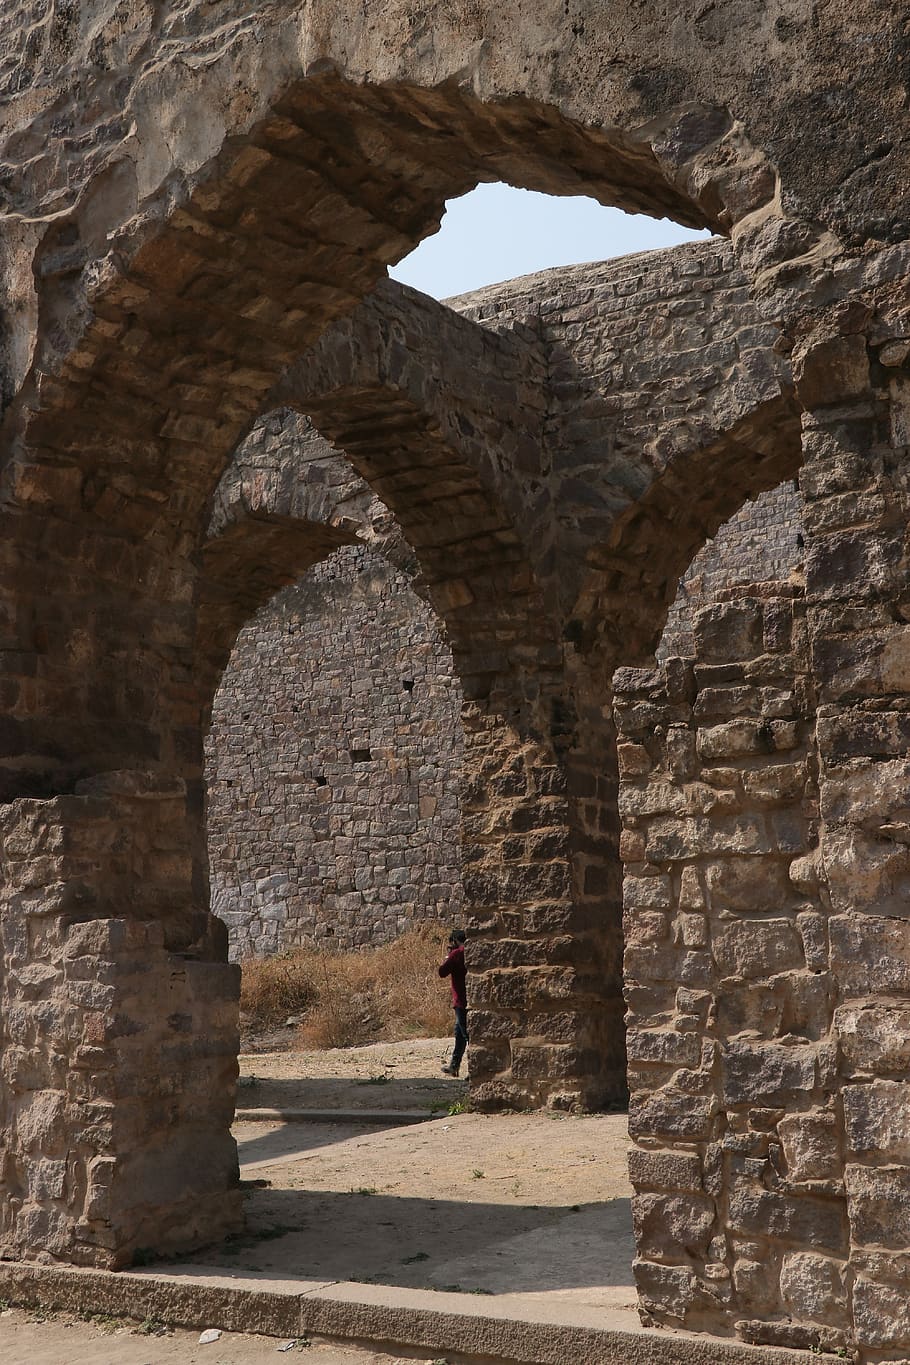 golconda fort, architecture, hyderabad, india, arch, the past, real people, history, one person, built structure